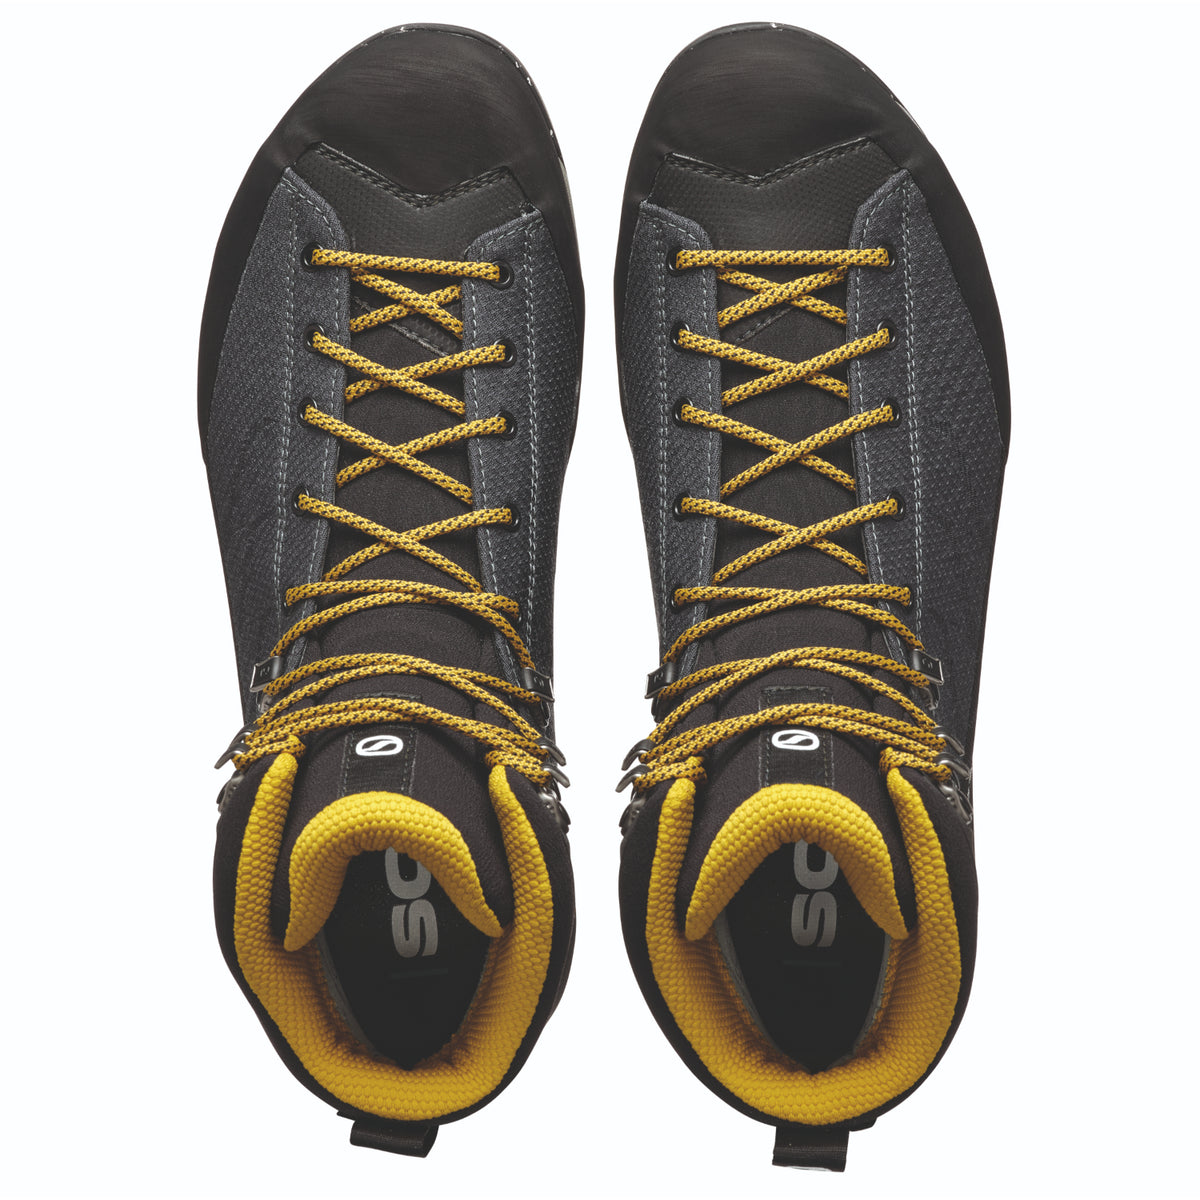 Scarpa Mescalito TRK Planet GTX in grey/curry. birds eye view showing laces